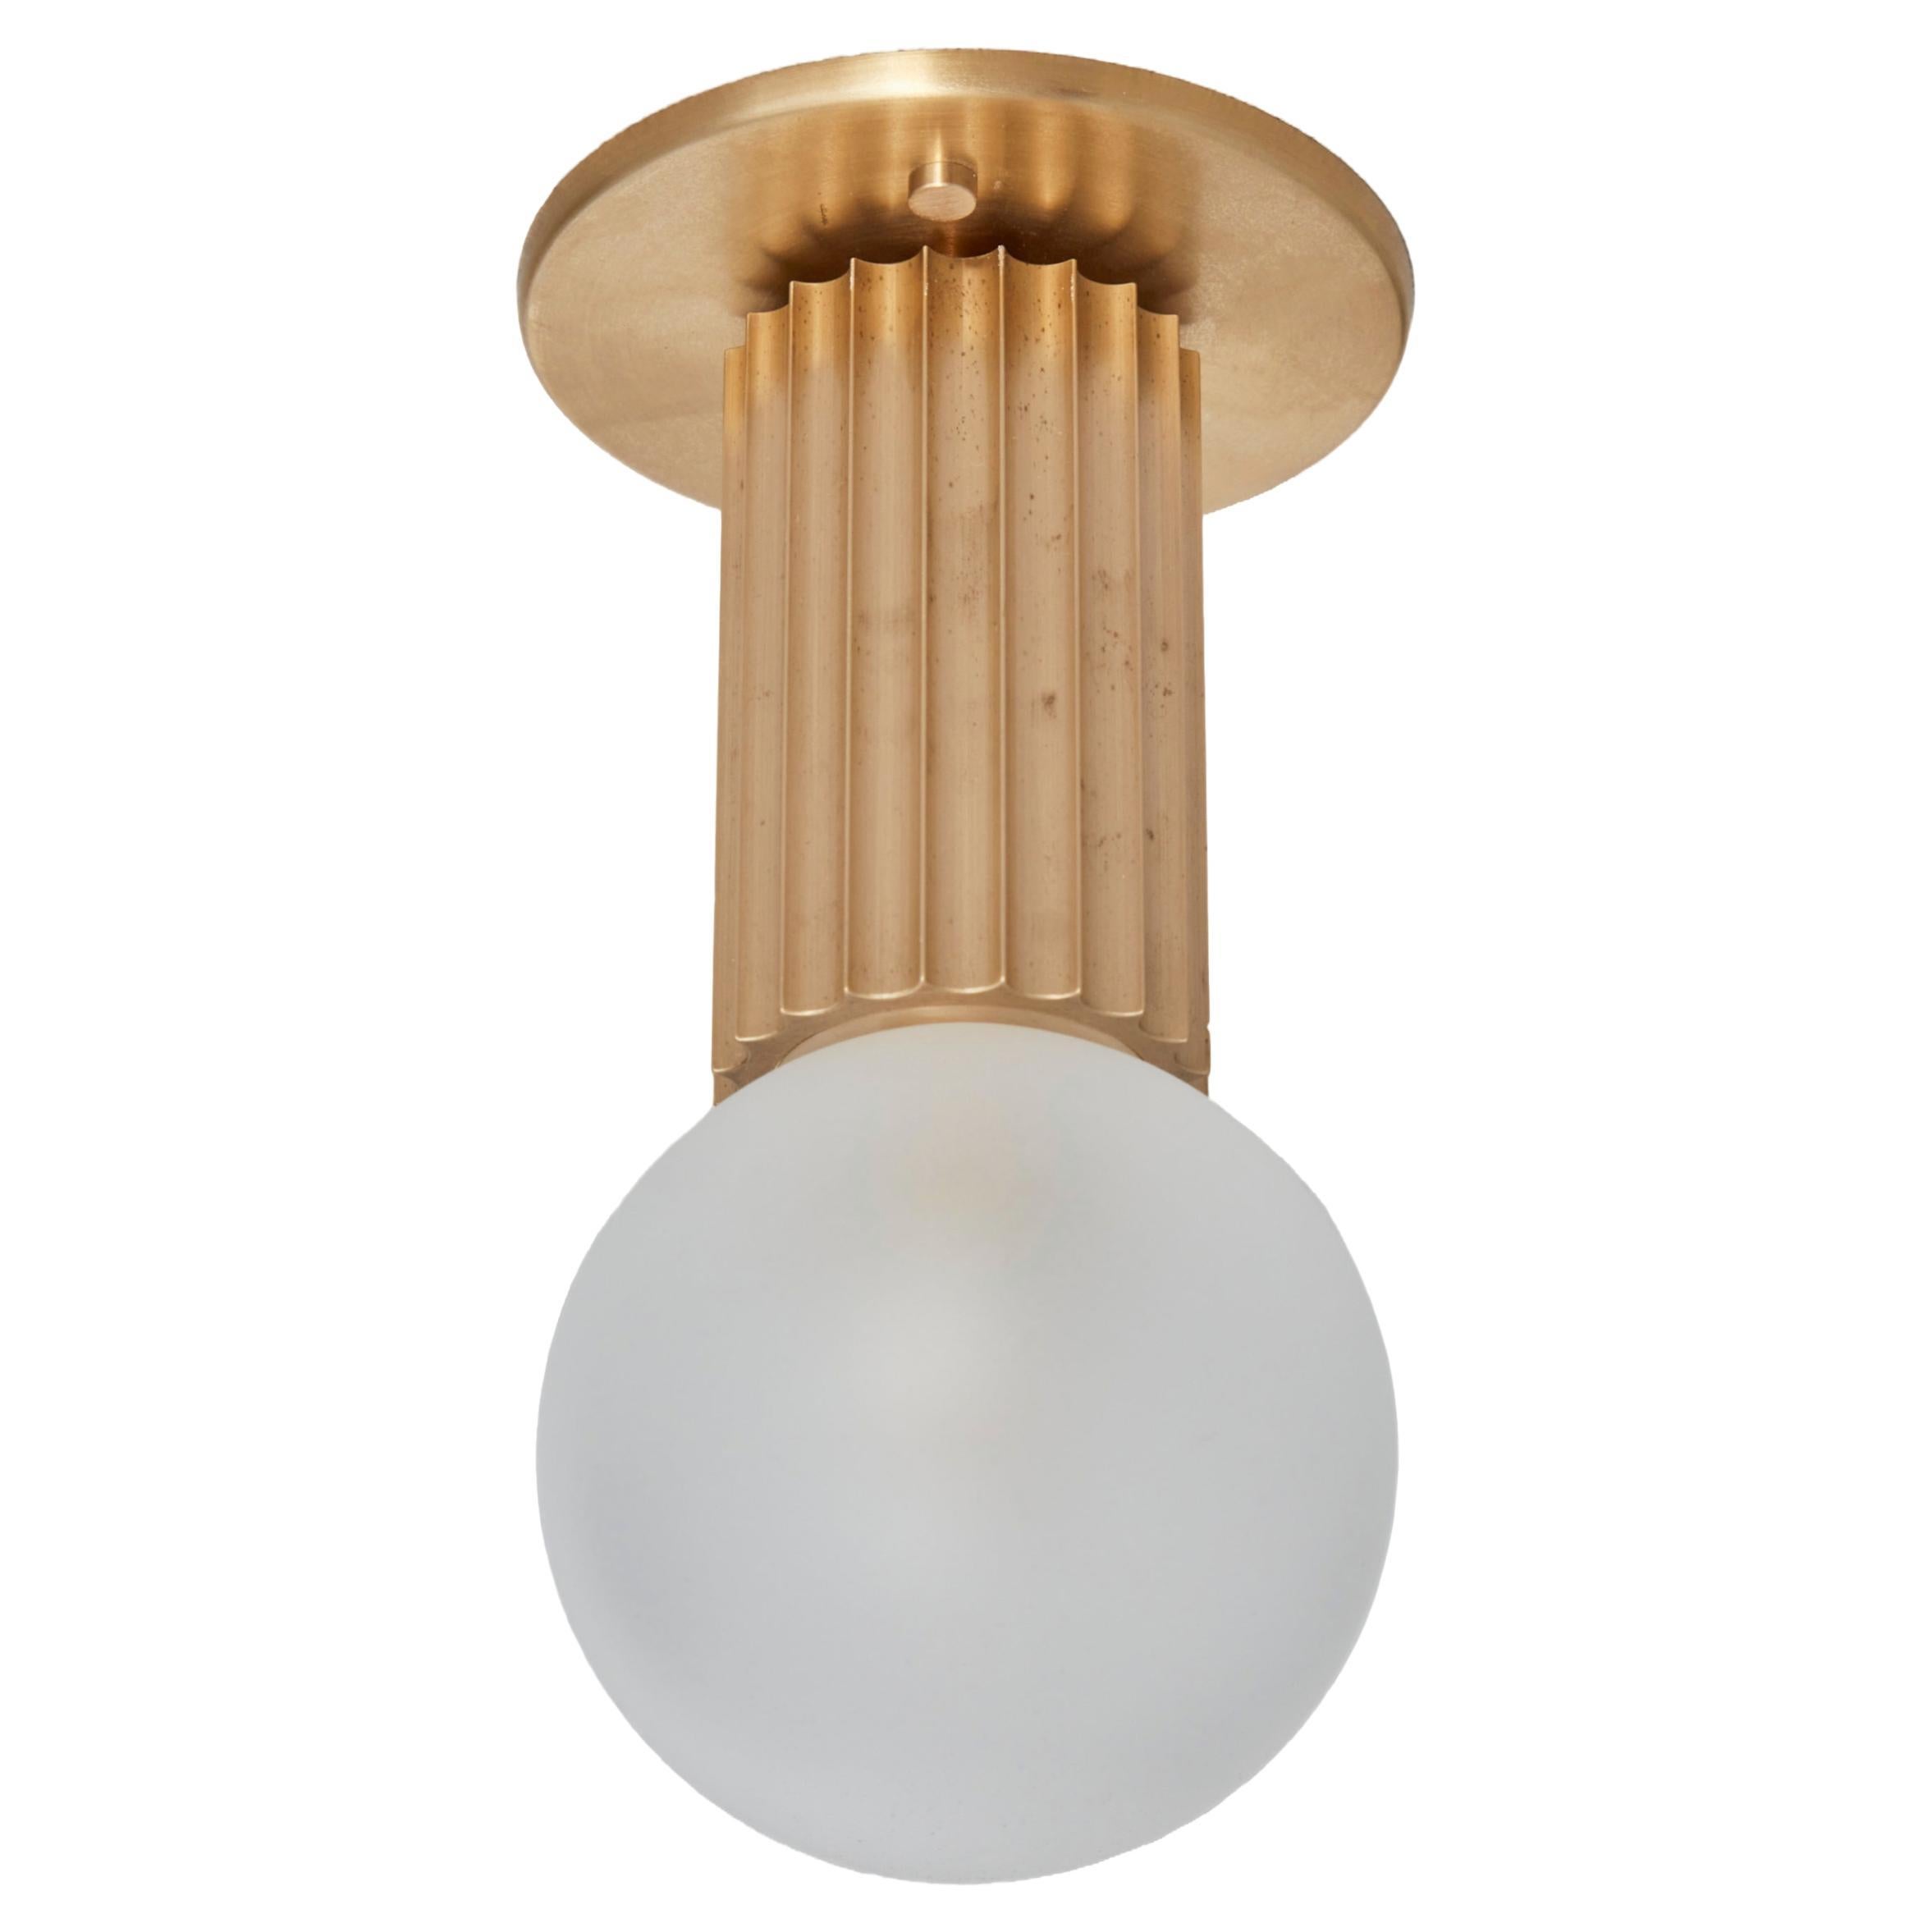 Marz Designs, "Attalos Ceiling Light with Slim Base Adapter", Ceiling Light For Sale